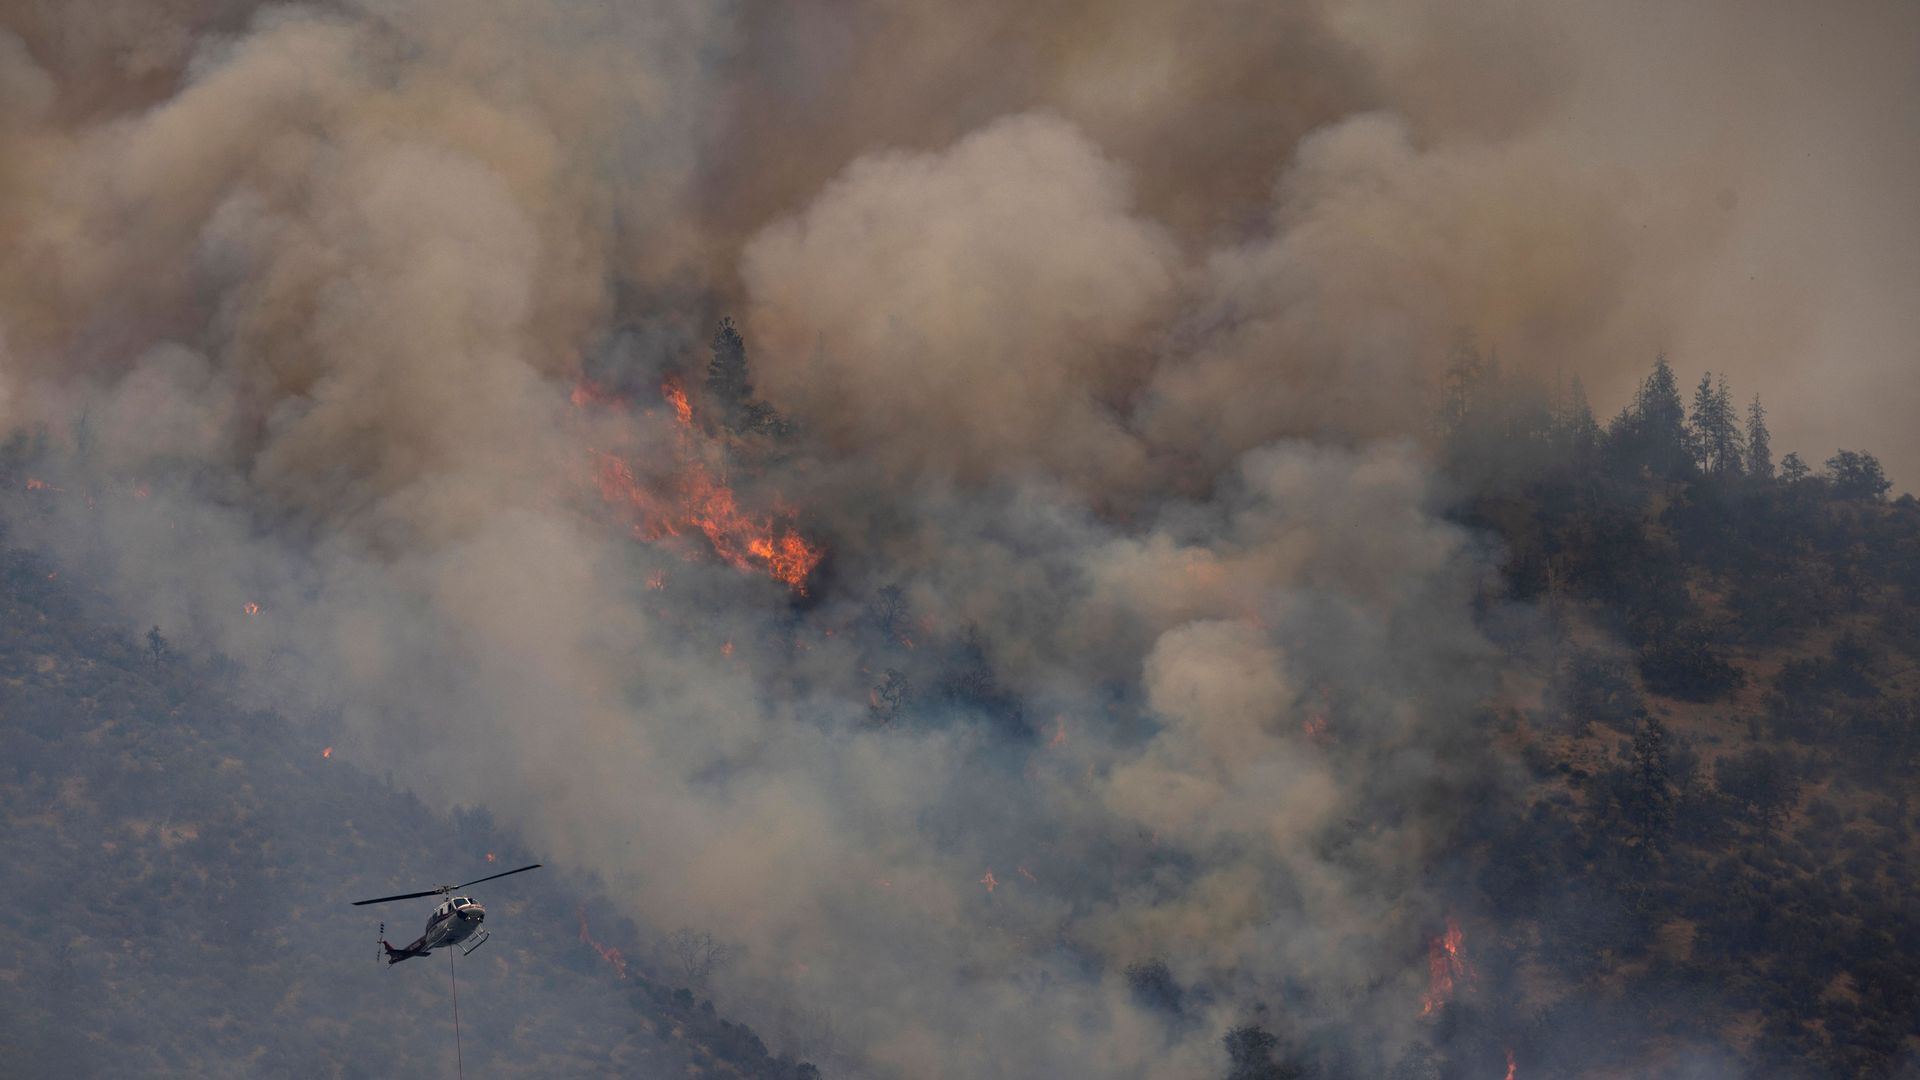 A helicopter flying near smoke and flames from the McKinney Fire in the Klamath National Forest near Yreka, California, on Aug. 2.